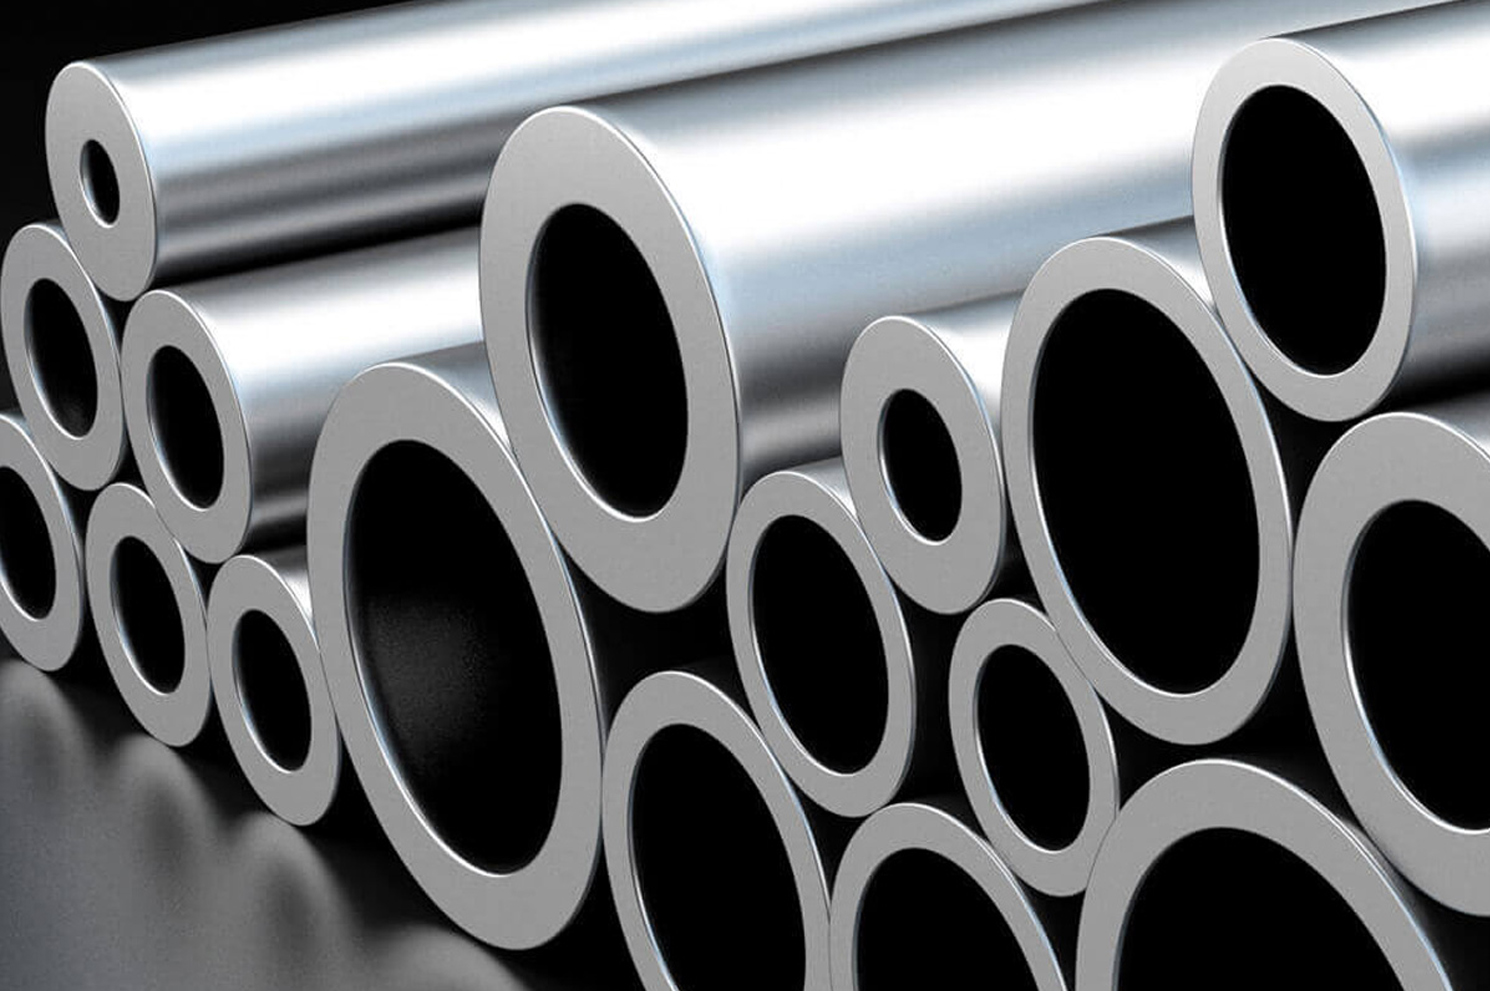 Stainless Steel Seamless Pipe & Tubes in Chennai,Stainless Steel Seamless Pipe & Tubes in Coimbatore